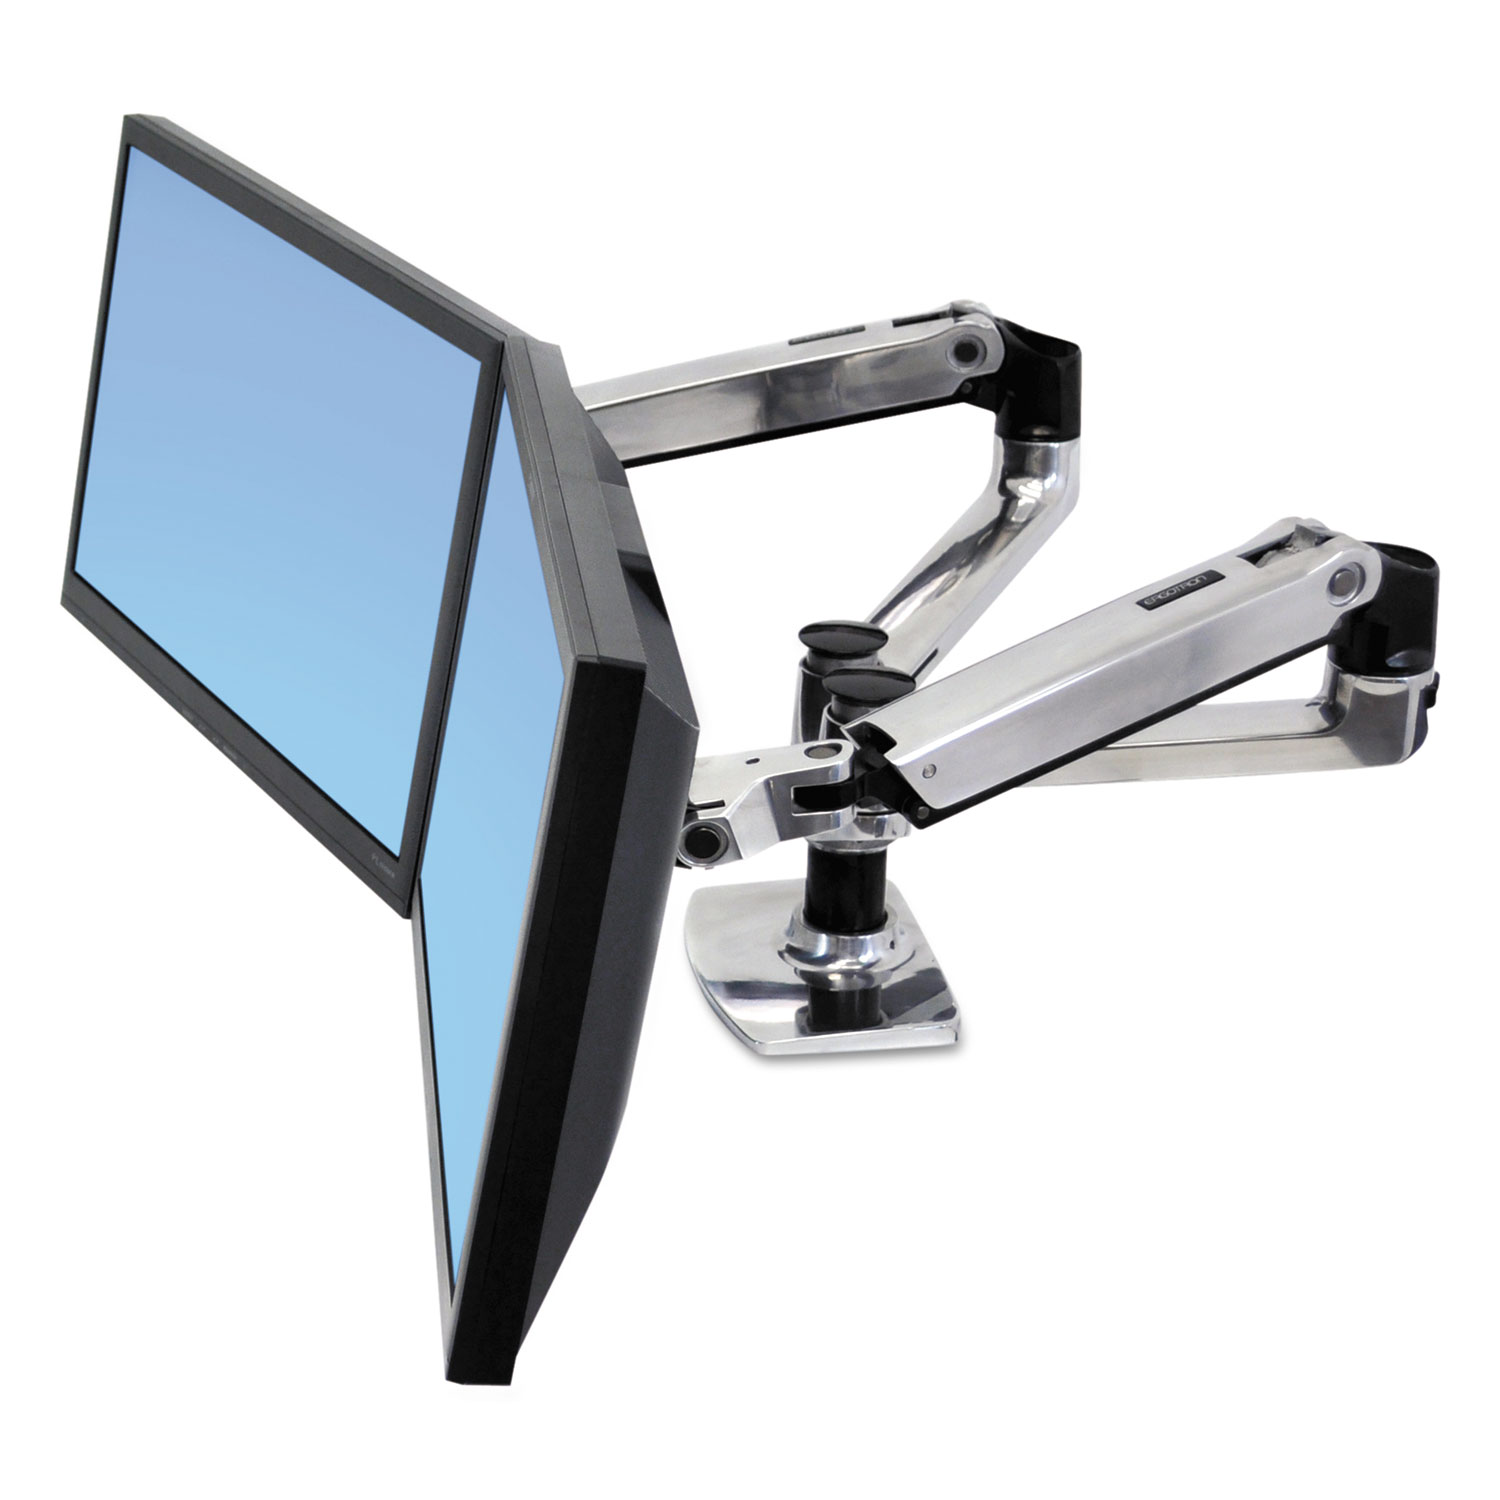  Ergotron 45-245-026 LX Dual Side-by-Side Arm for WorkFit-D Sit-Stand Desk, 21.4w x 25.6d x 20.9h (ERG45245026) 